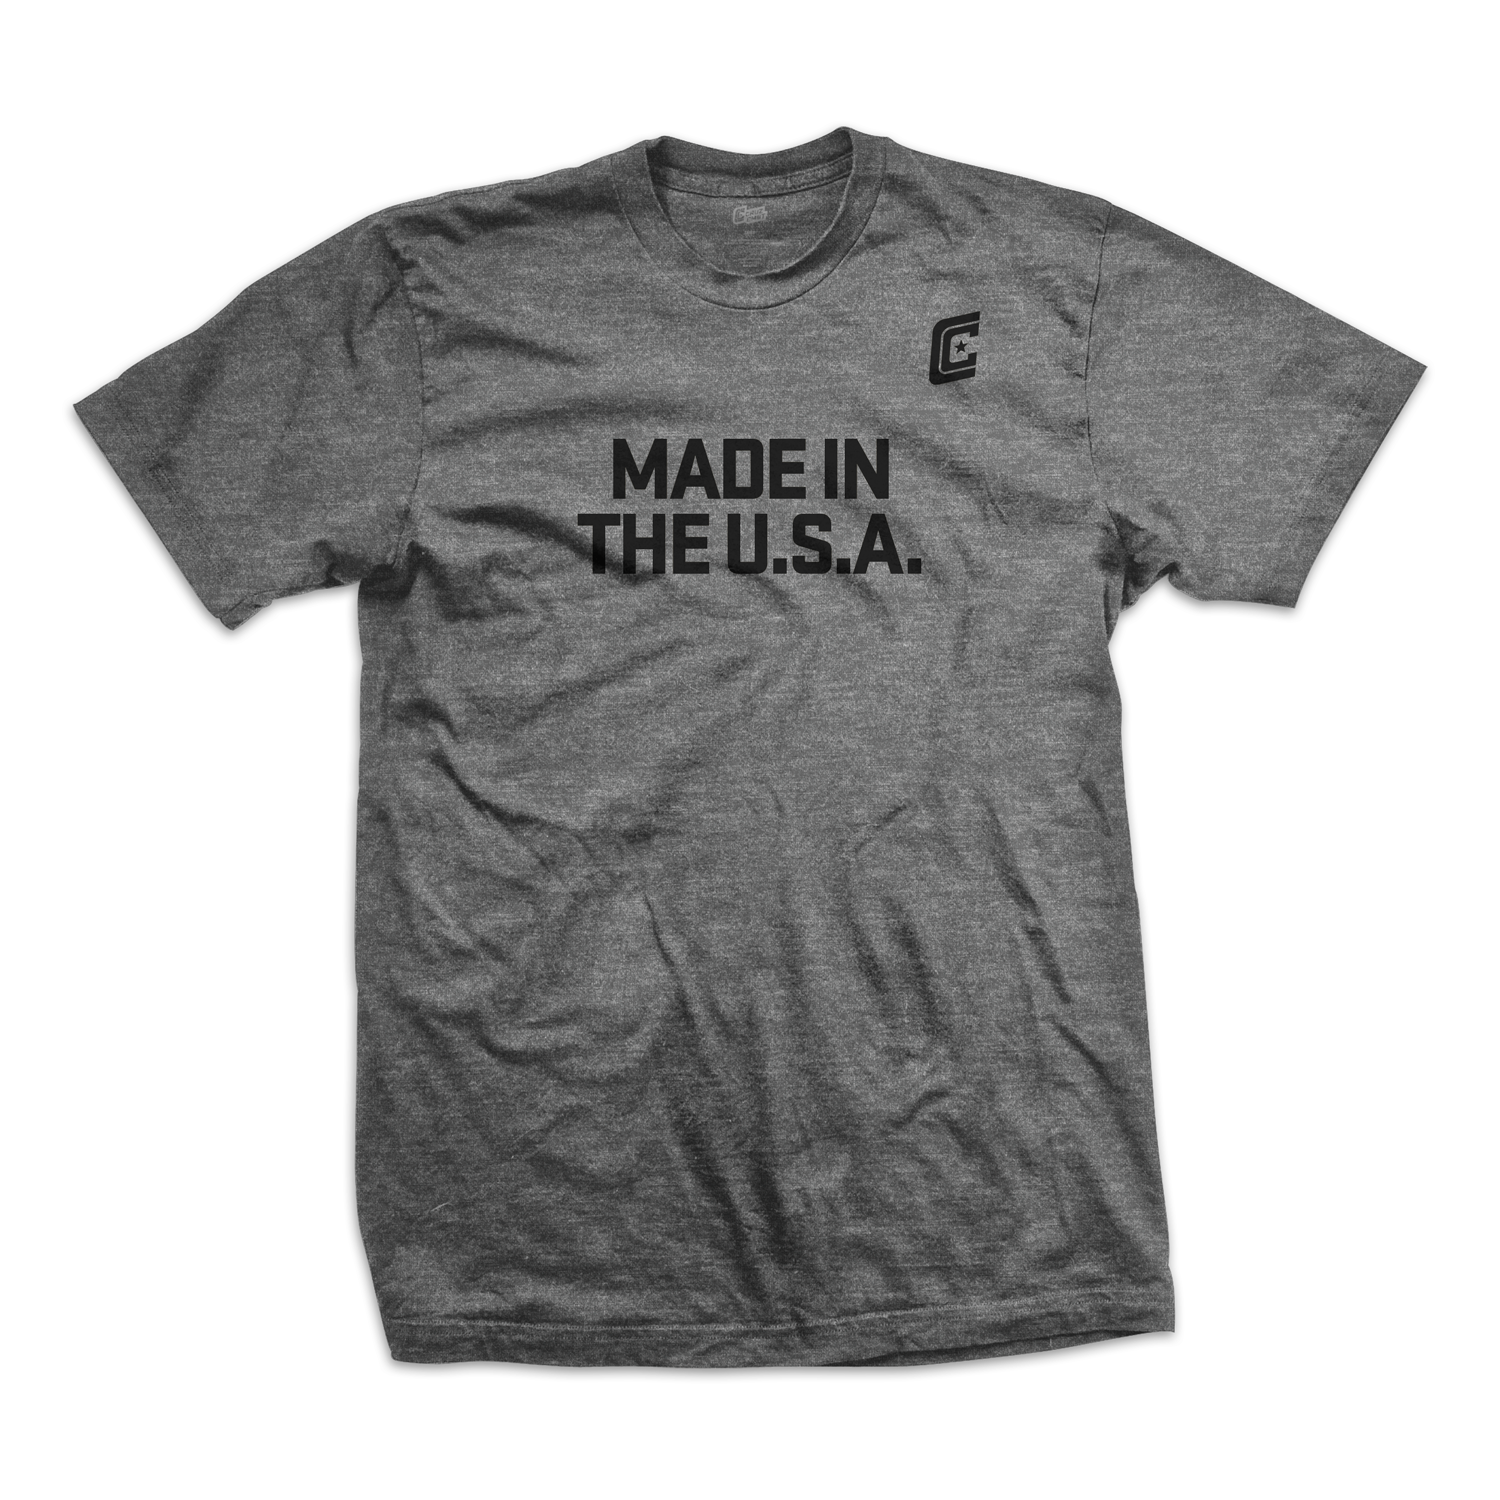 MADE IN THE USA tee